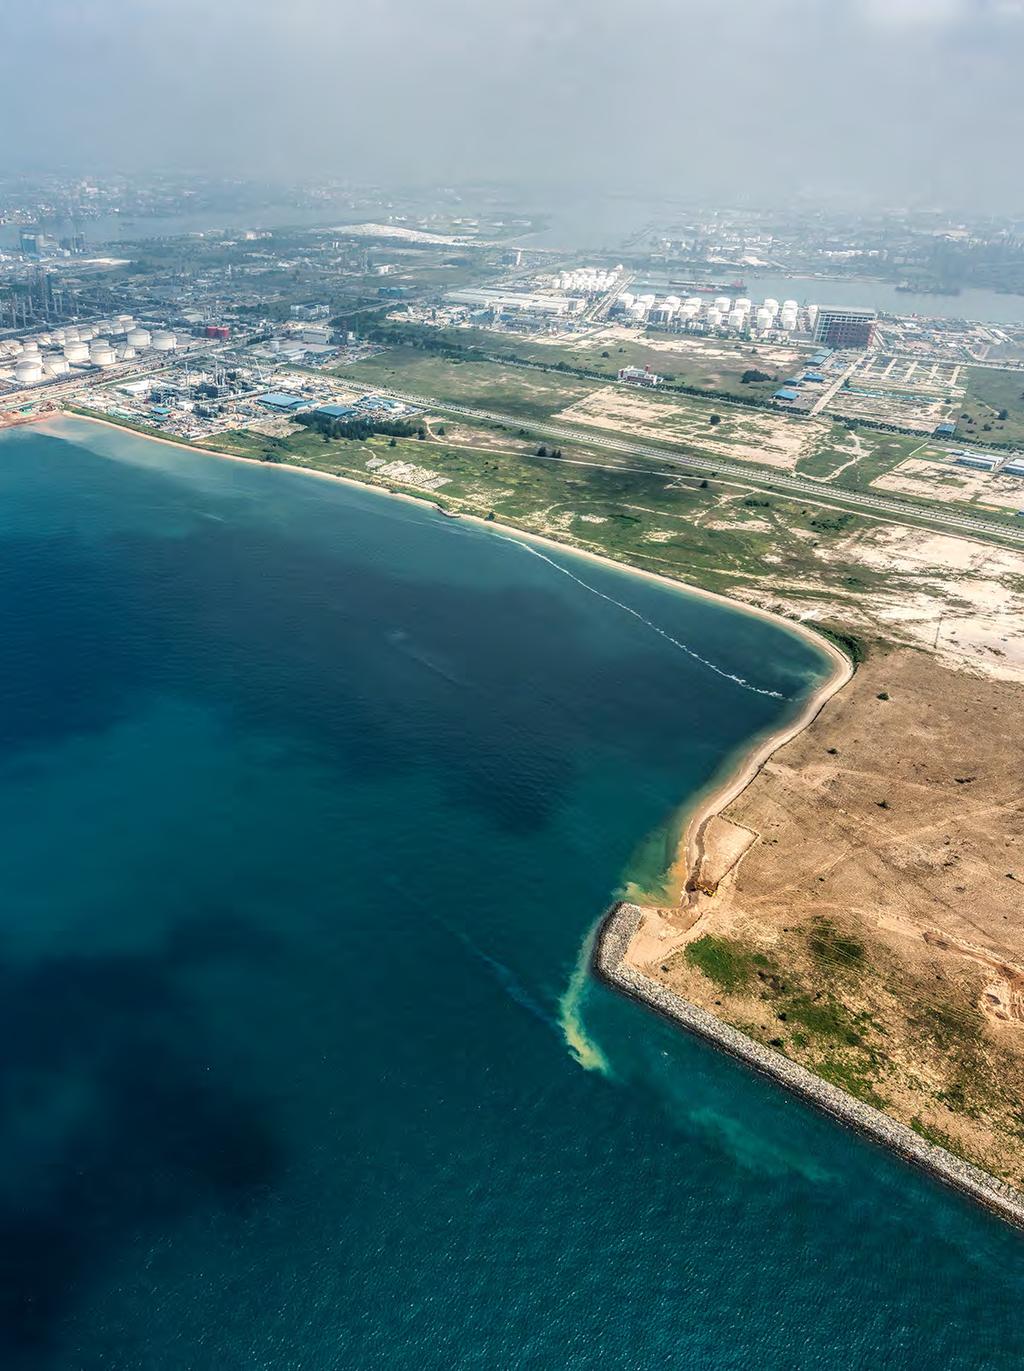 Engineering The Coastline We have created world-class ports and sustainable coastal environments, sculpting shorelines and enhancing land values.